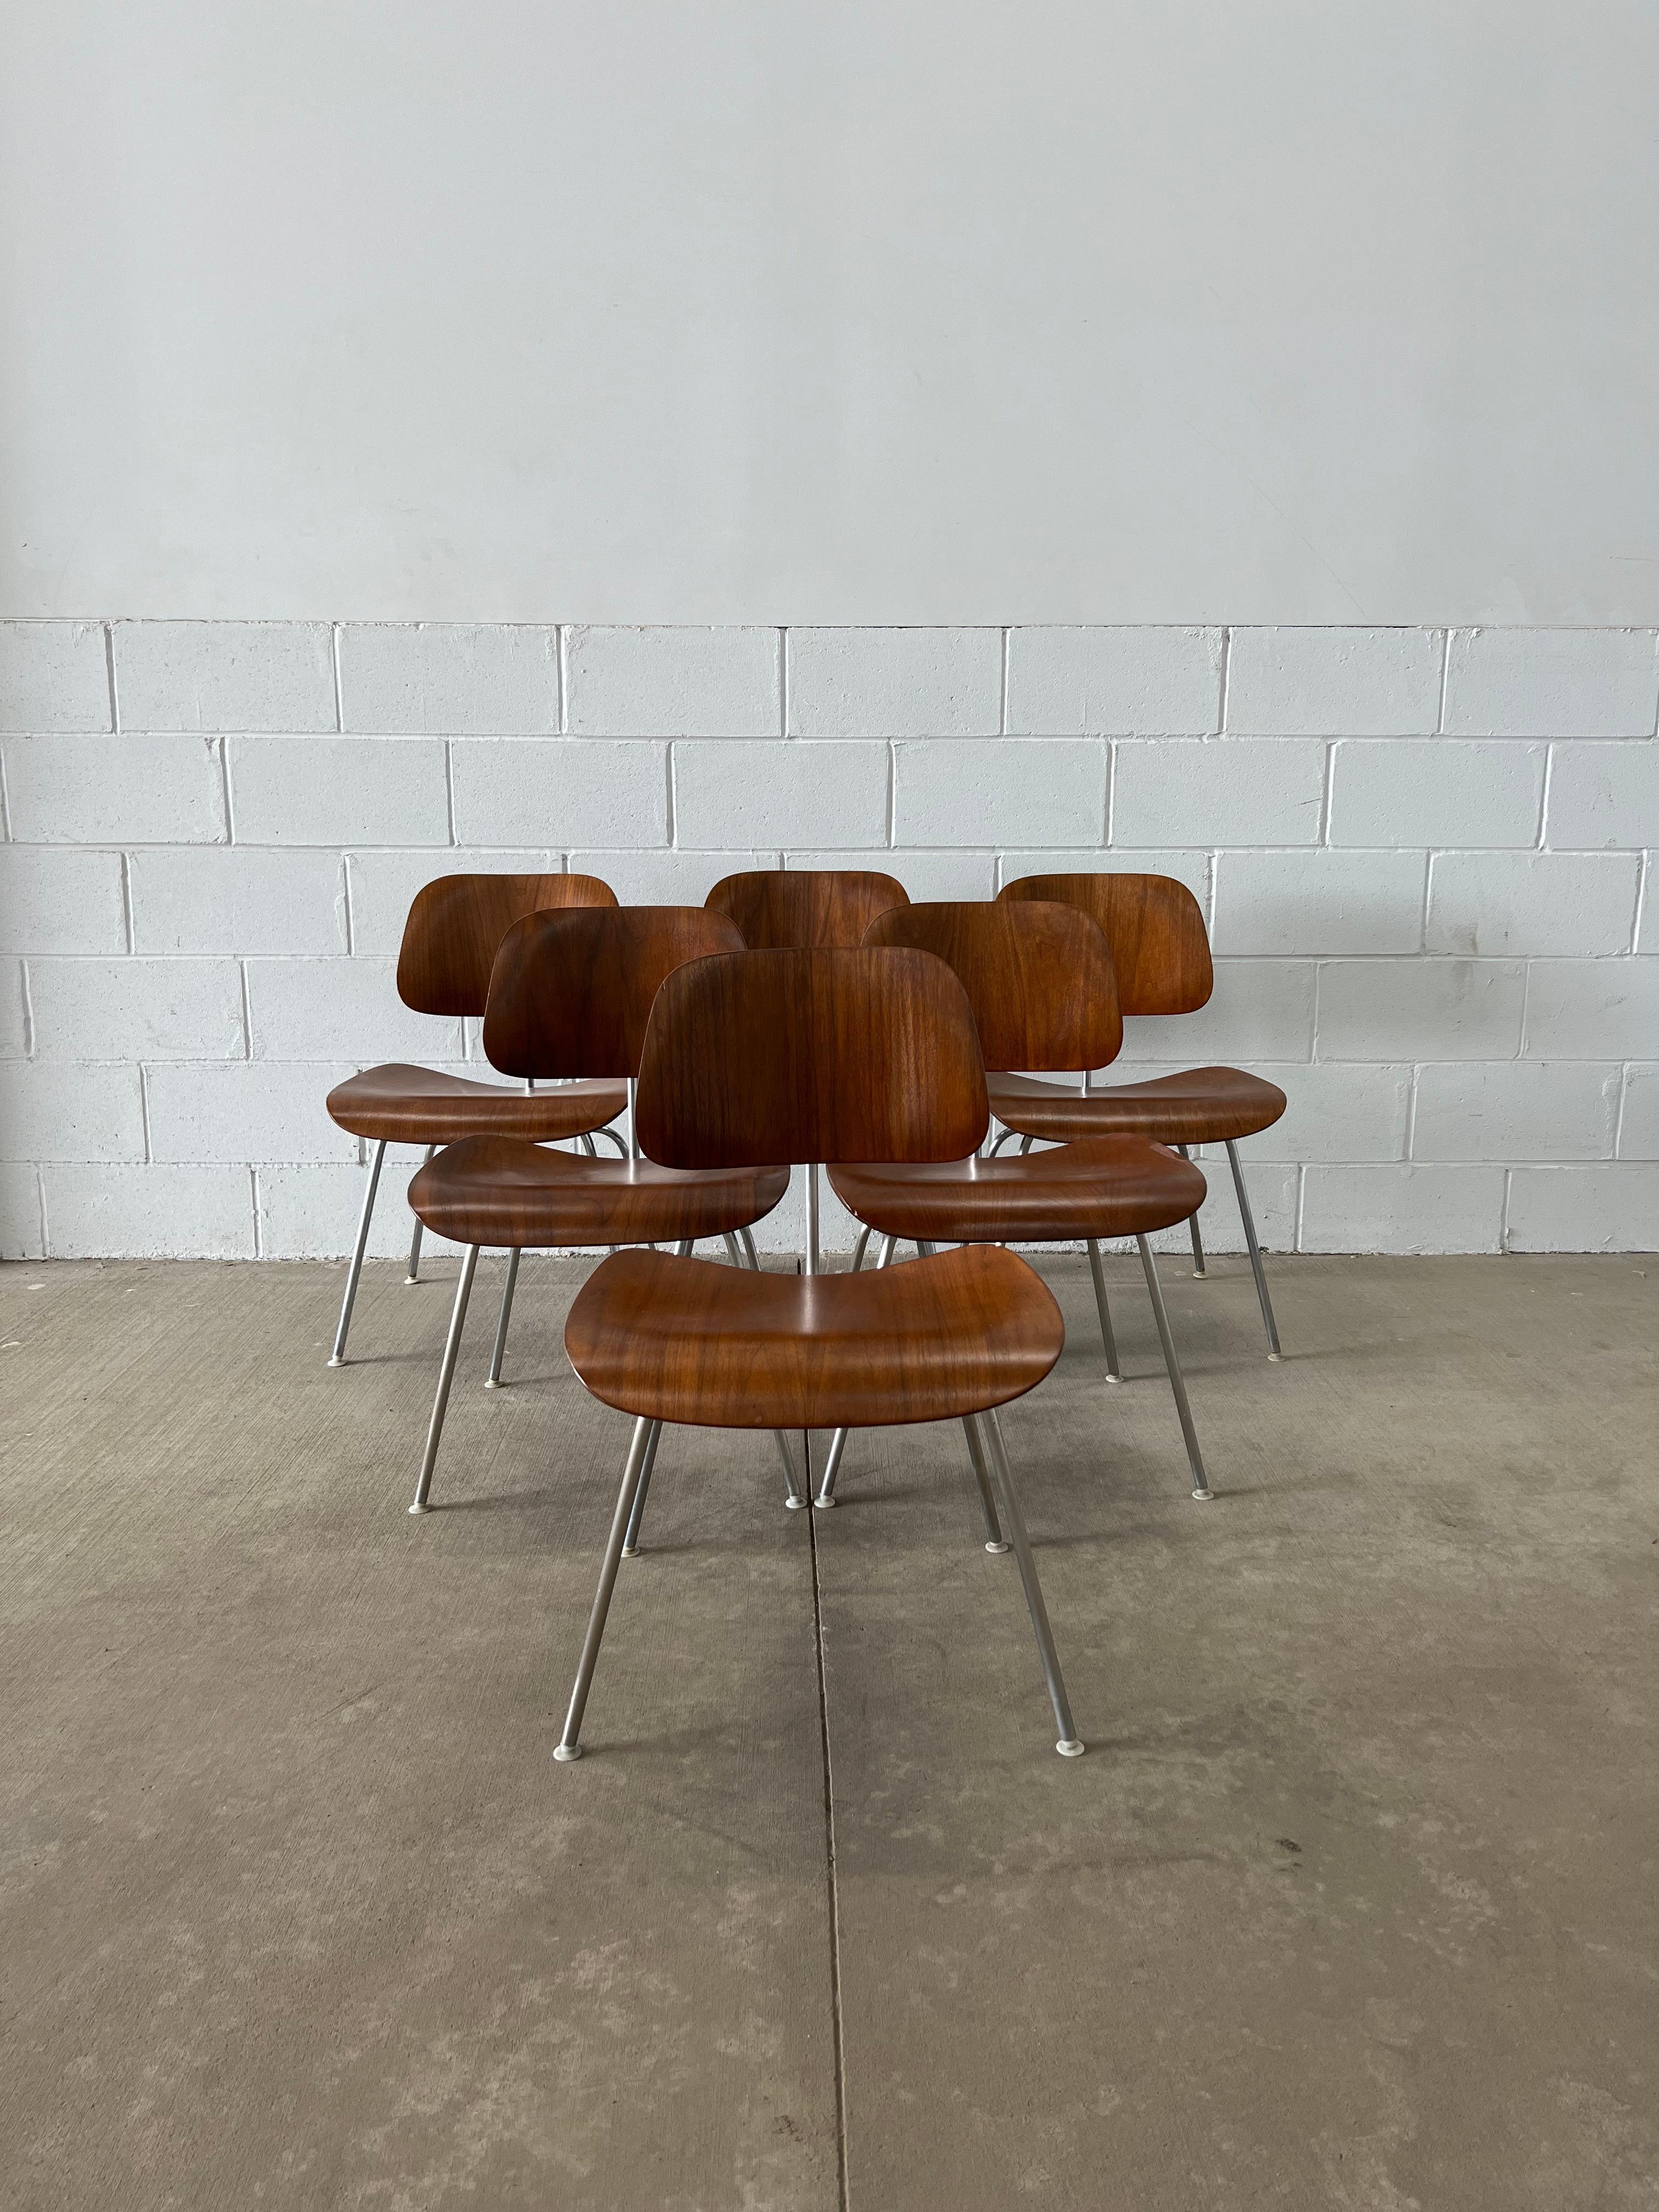 The chair that started it all. Masters of molded plywood, the Eames adapted their dining chair wood to be fitted with a metal base and thus the dining chair metal was born. 

This set of walnuts chairs spans a couple editions as evidenced by the